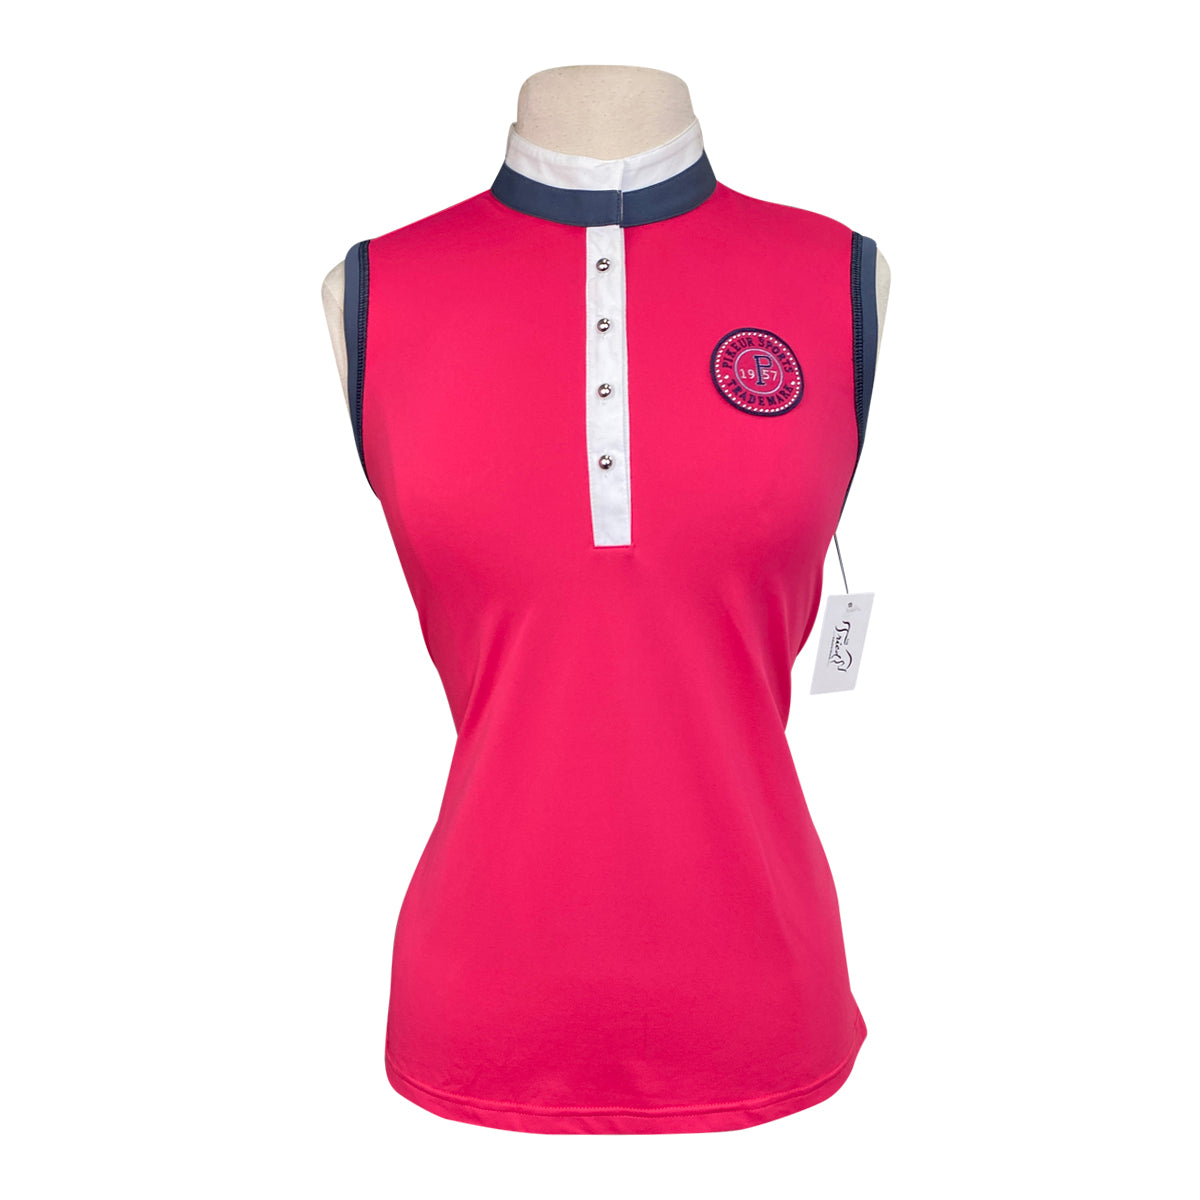 Pikeur 'Jena' Competition Shirt in Pink